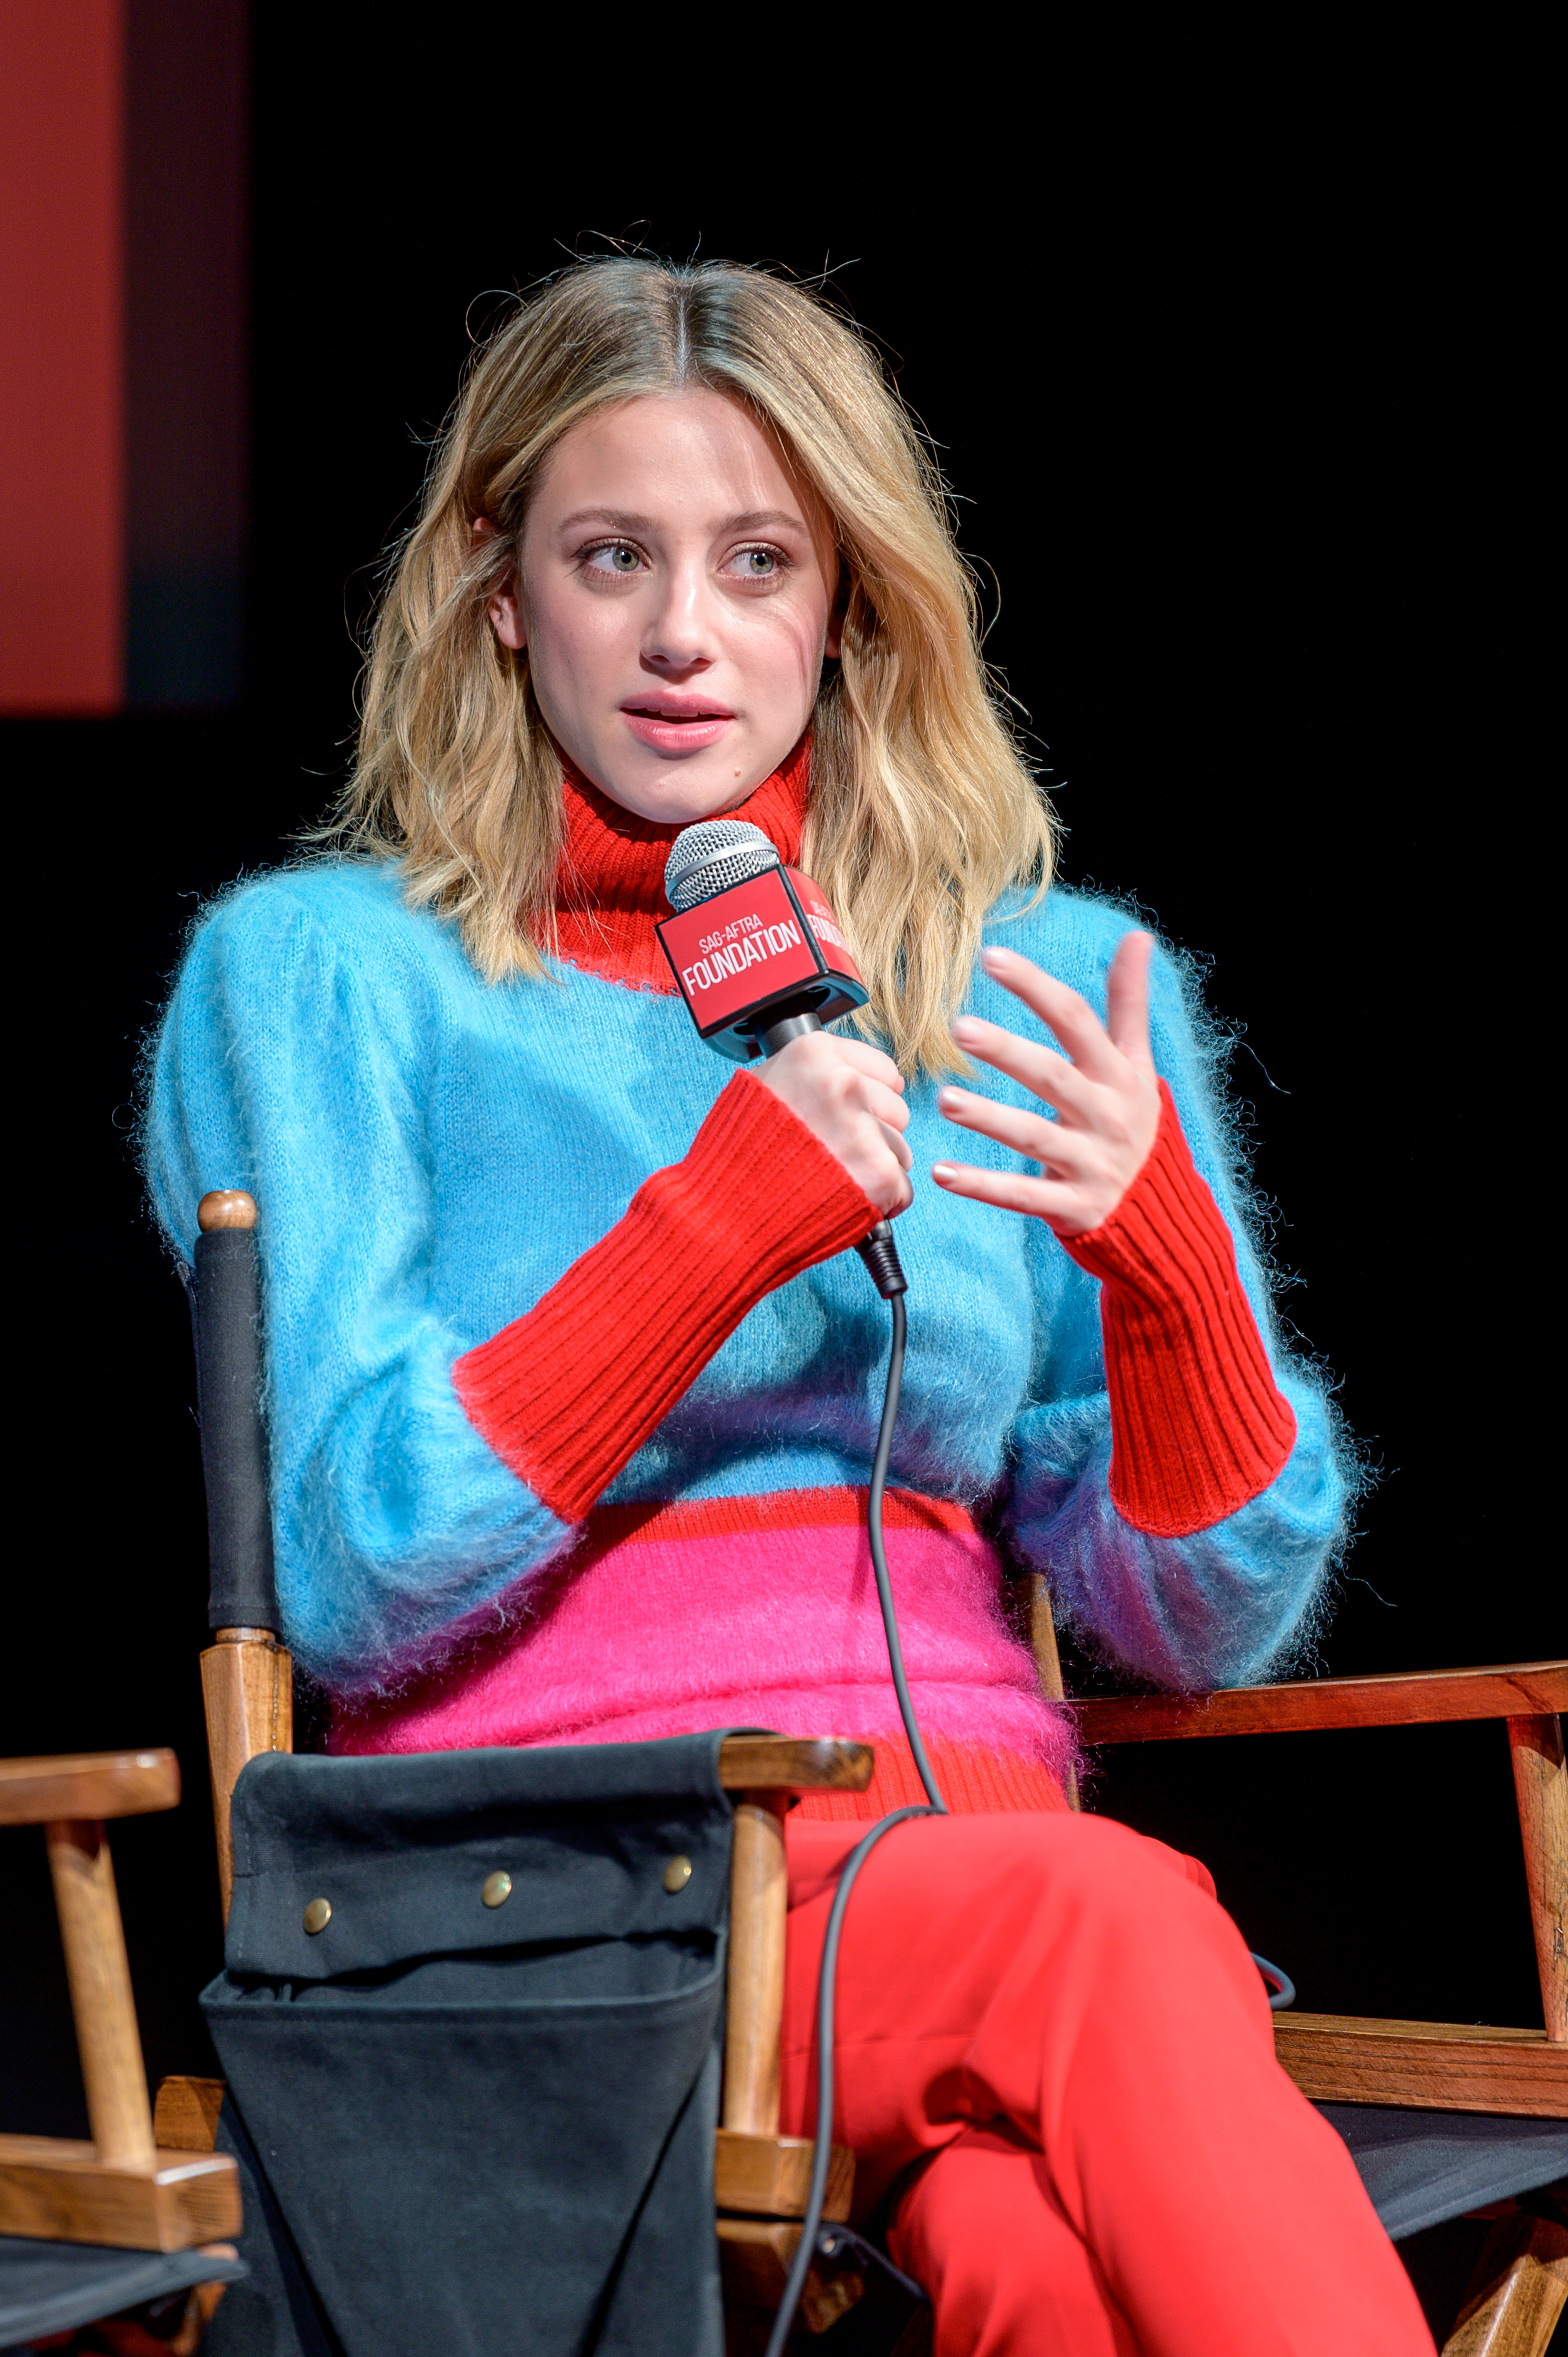 Lili Reinhart sitting onstage talking into a microphone